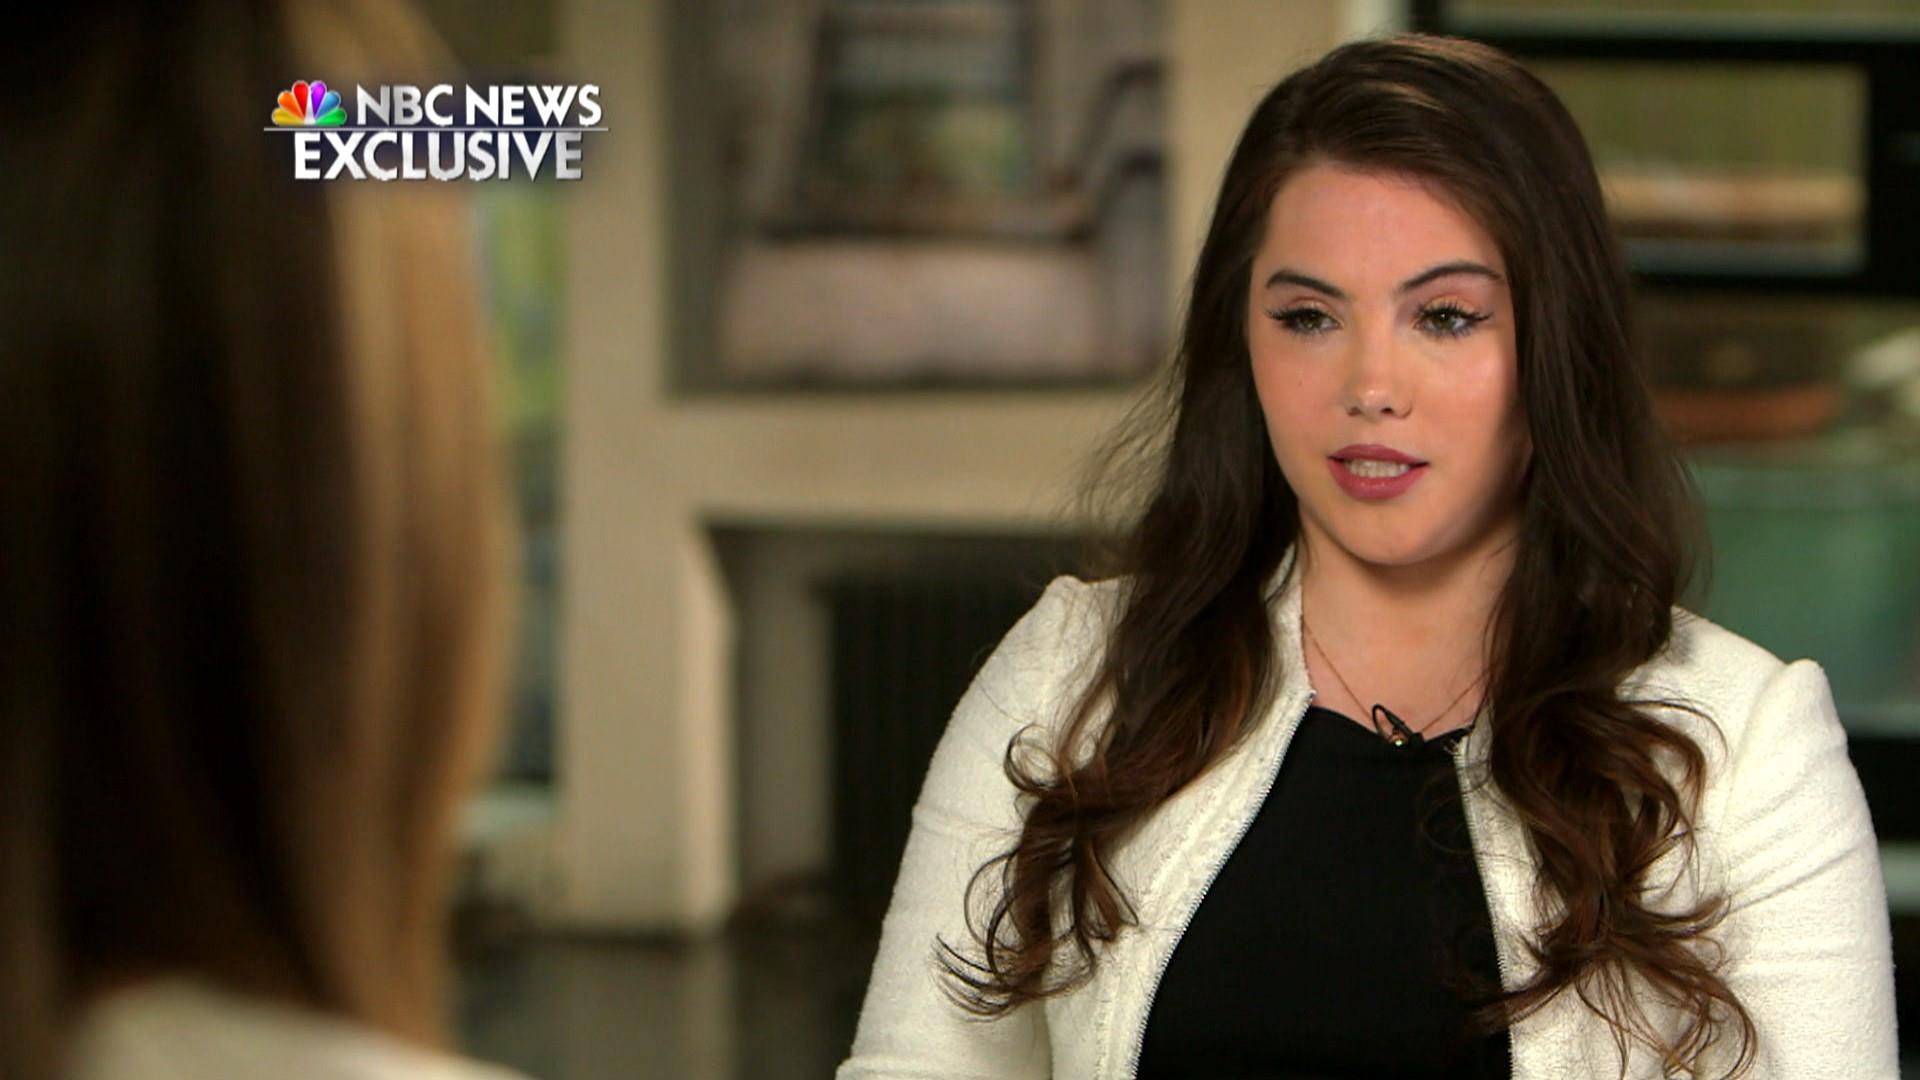 Mckayla Maroney Says She Tried To Raise Sex Abuse Alarm In 2011